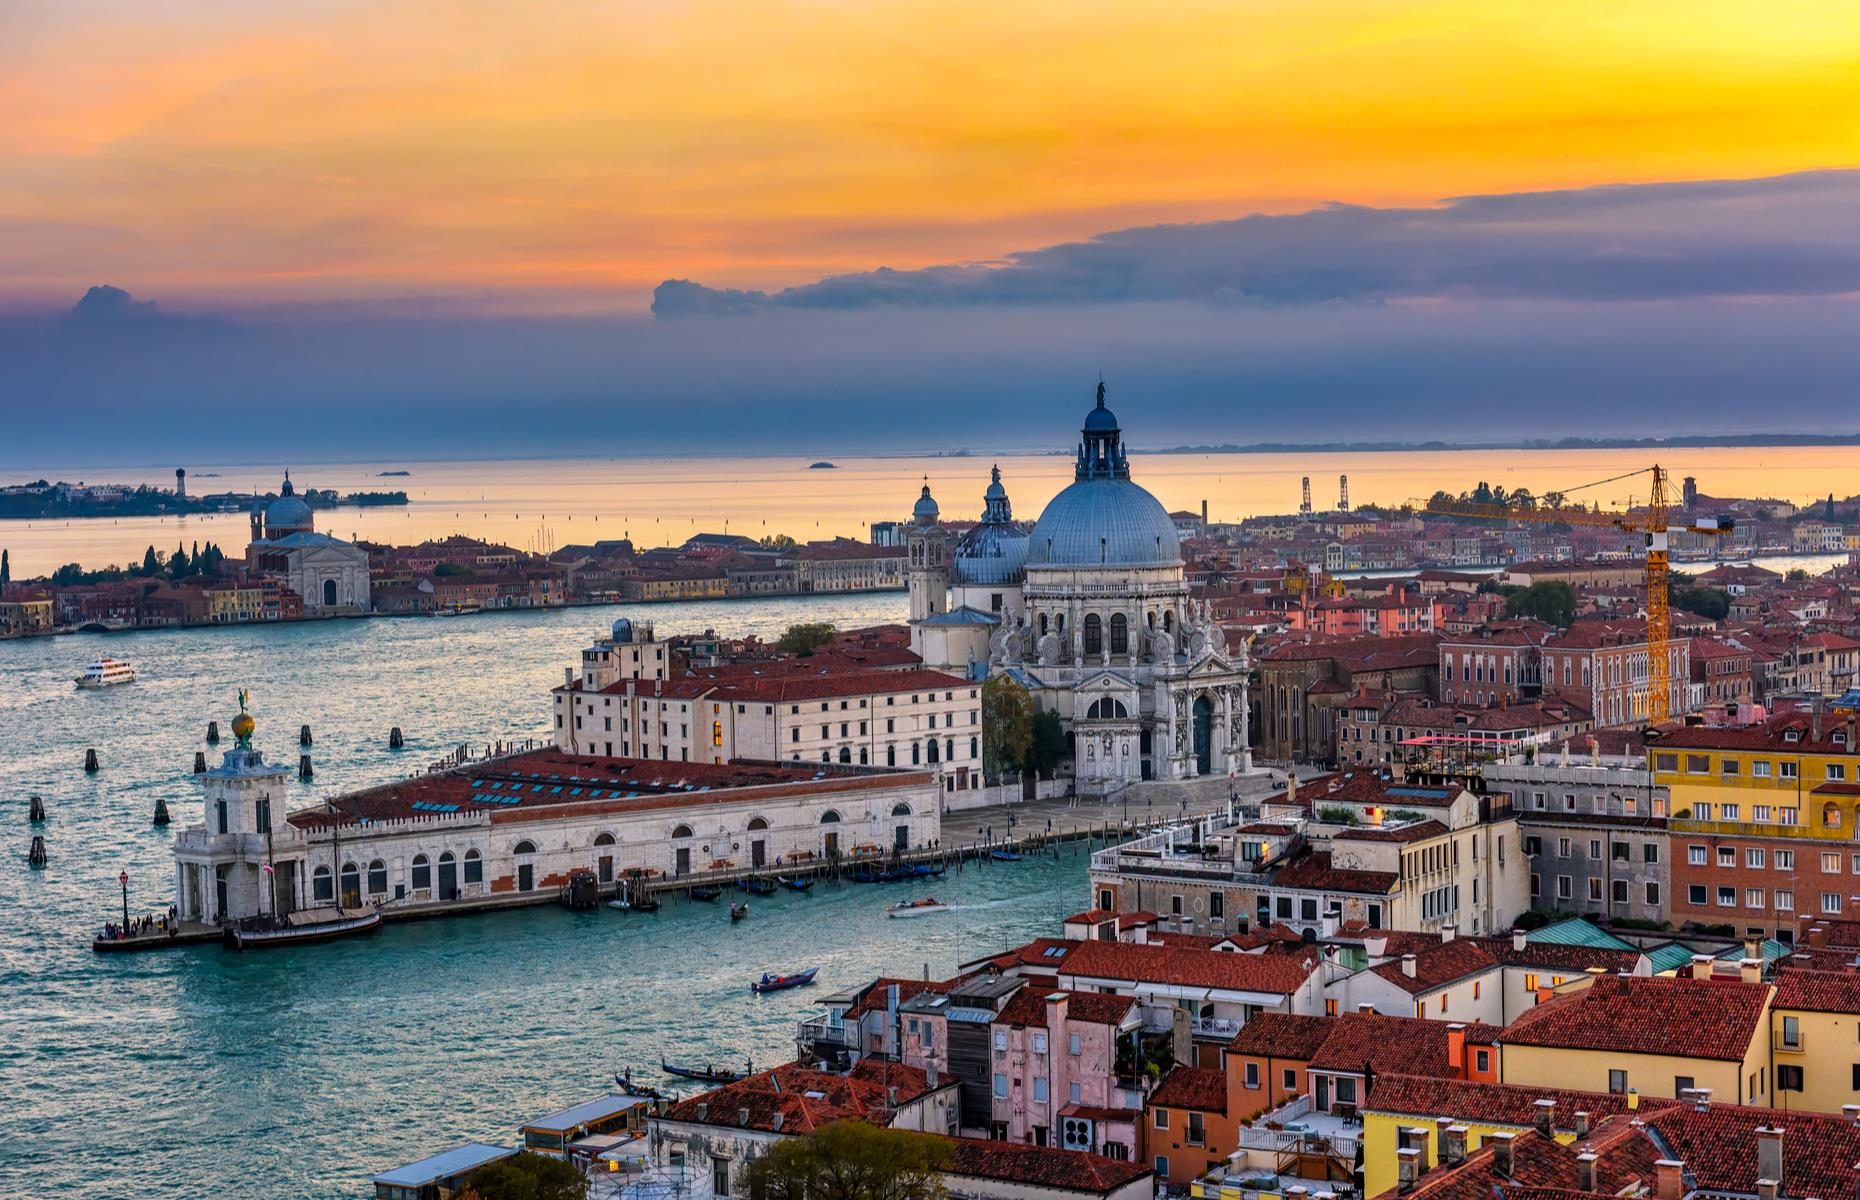 Few waterways have quite the status held by Venice’s majestic Grand Canal, a sweeping S-shaped channel that cuts through the Floating City. Lined by historic palazzos, grand churches and prominent museums, the city’s main traffic corridor is well-suited to gazing up at the stunning Venetian architecture and maze-like streets.